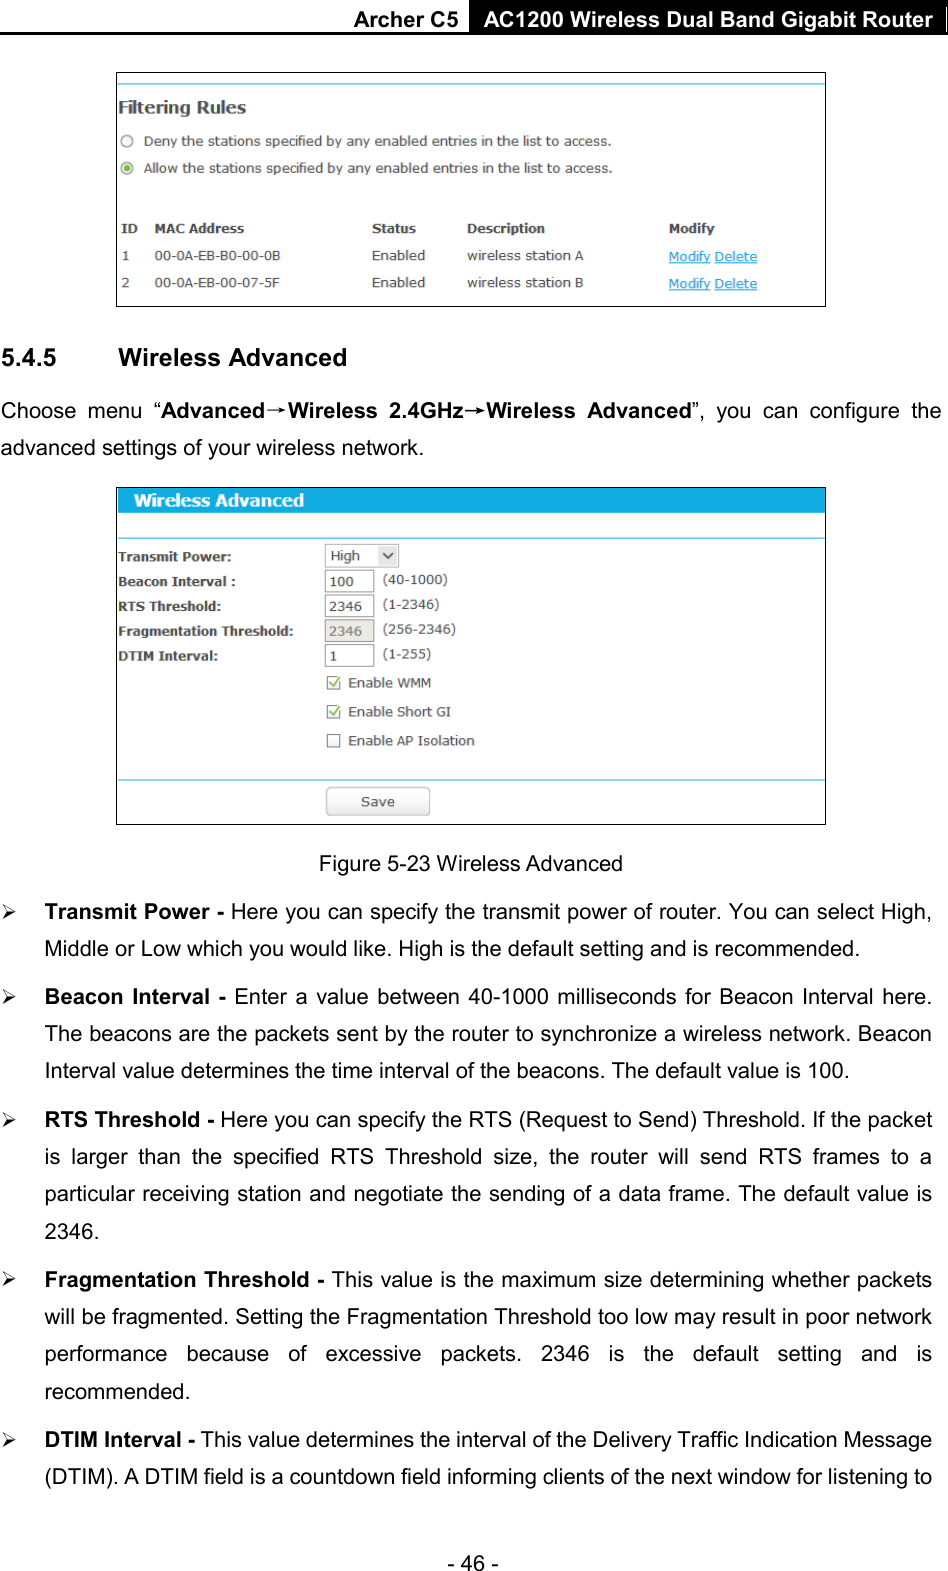 Archer C5  AC1200 Wireless Dual Band Gigabit Router   5.4.5 Wireless Advanced Choose menu “Advanced→Wireless 2.4GHz→Wireless  Advanced”, you can configure the advanced settings of your wireless network.  Figure 5-23 Wireless Advanced  Transmit Power - Here you can specify the transmit power of router. You can select High, Middle or Low which you would like. High is the default setting and is recommended.  Beacon Interval - Enter a value between 40-1000 milliseconds for Beacon Interval here. The beacons are the packets sent by the router to synchronize a wireless network. Beacon Interval value determines the time interval of the beacons. The default value is 100.    RTS Threshold - Here you can specify the RTS (Request to Send) Threshold. If the packet is larger than the specified RTS Threshold size, the router  will send RTS frames to a particular receiving station and negotiate the sending of a data frame. The default value is 2346.    Fragmentation Threshold - This value is the maximum size determining whether packets will be fragmented. Setting the Fragmentation Threshold too low may result in poor network performance because of excessive packets. 2346 is the default setting and is recommended.    DTIM Interval - This value determines the interval of the Delivery Traffic Indication Message (DTIM). A DTIM field is a countdown field informing clients of the next window for listening to - 46 - 